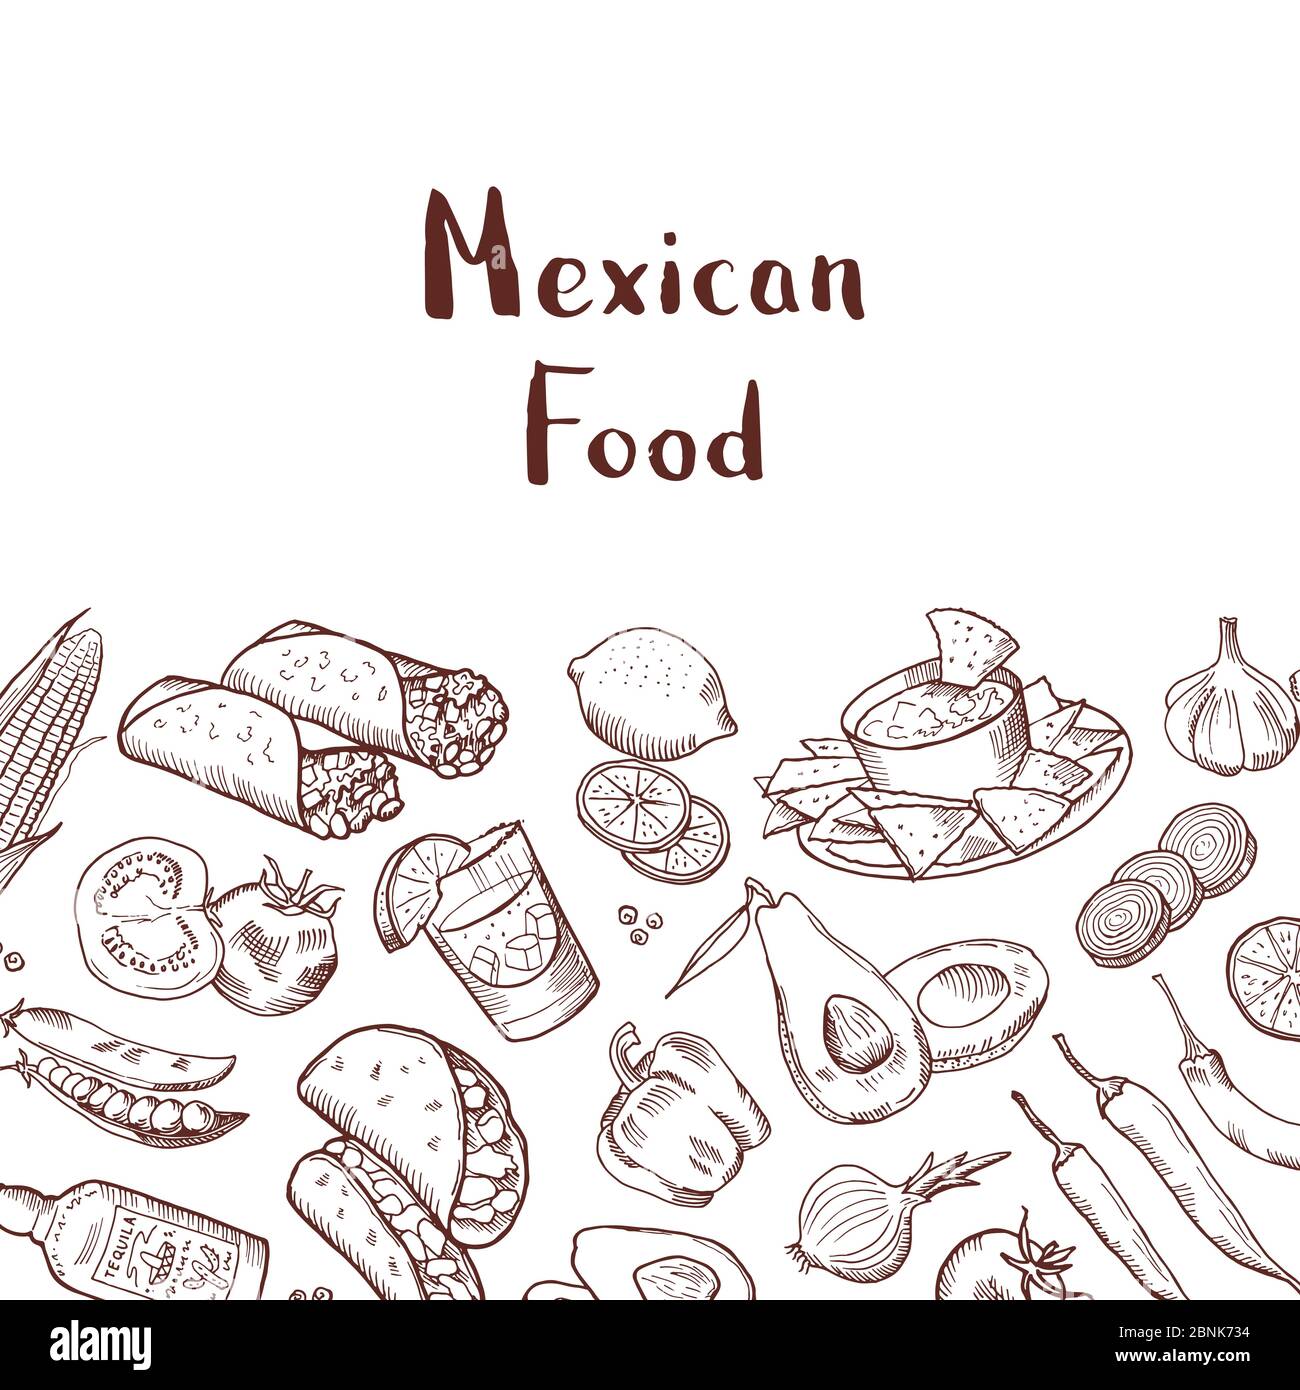 Vector sketched mexican food elements background with place for text Stock Vector